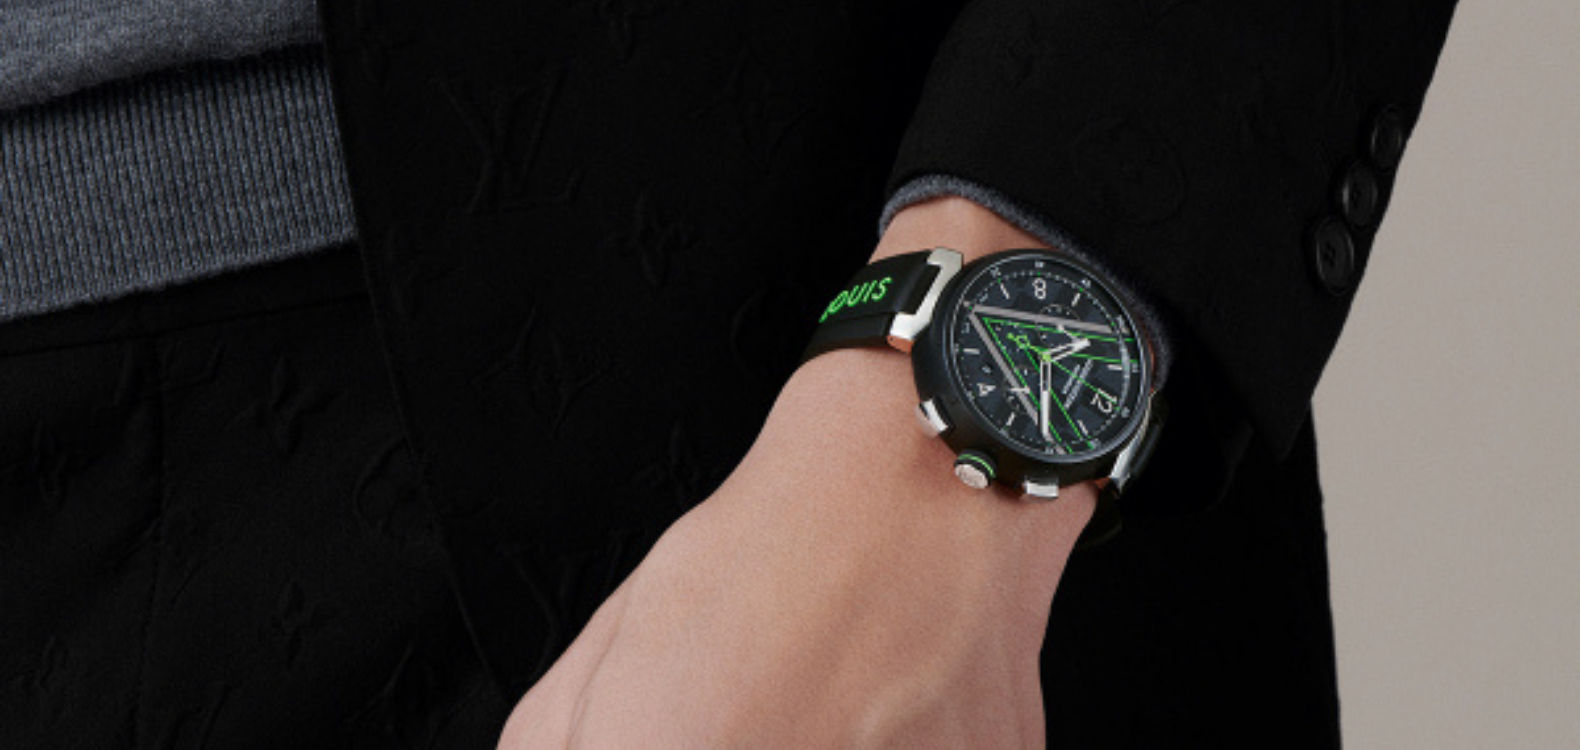 HANDS-ON: The Louis Vuitton Tambour Damier Graphite Race Chronograph brings  green lasers to a gun